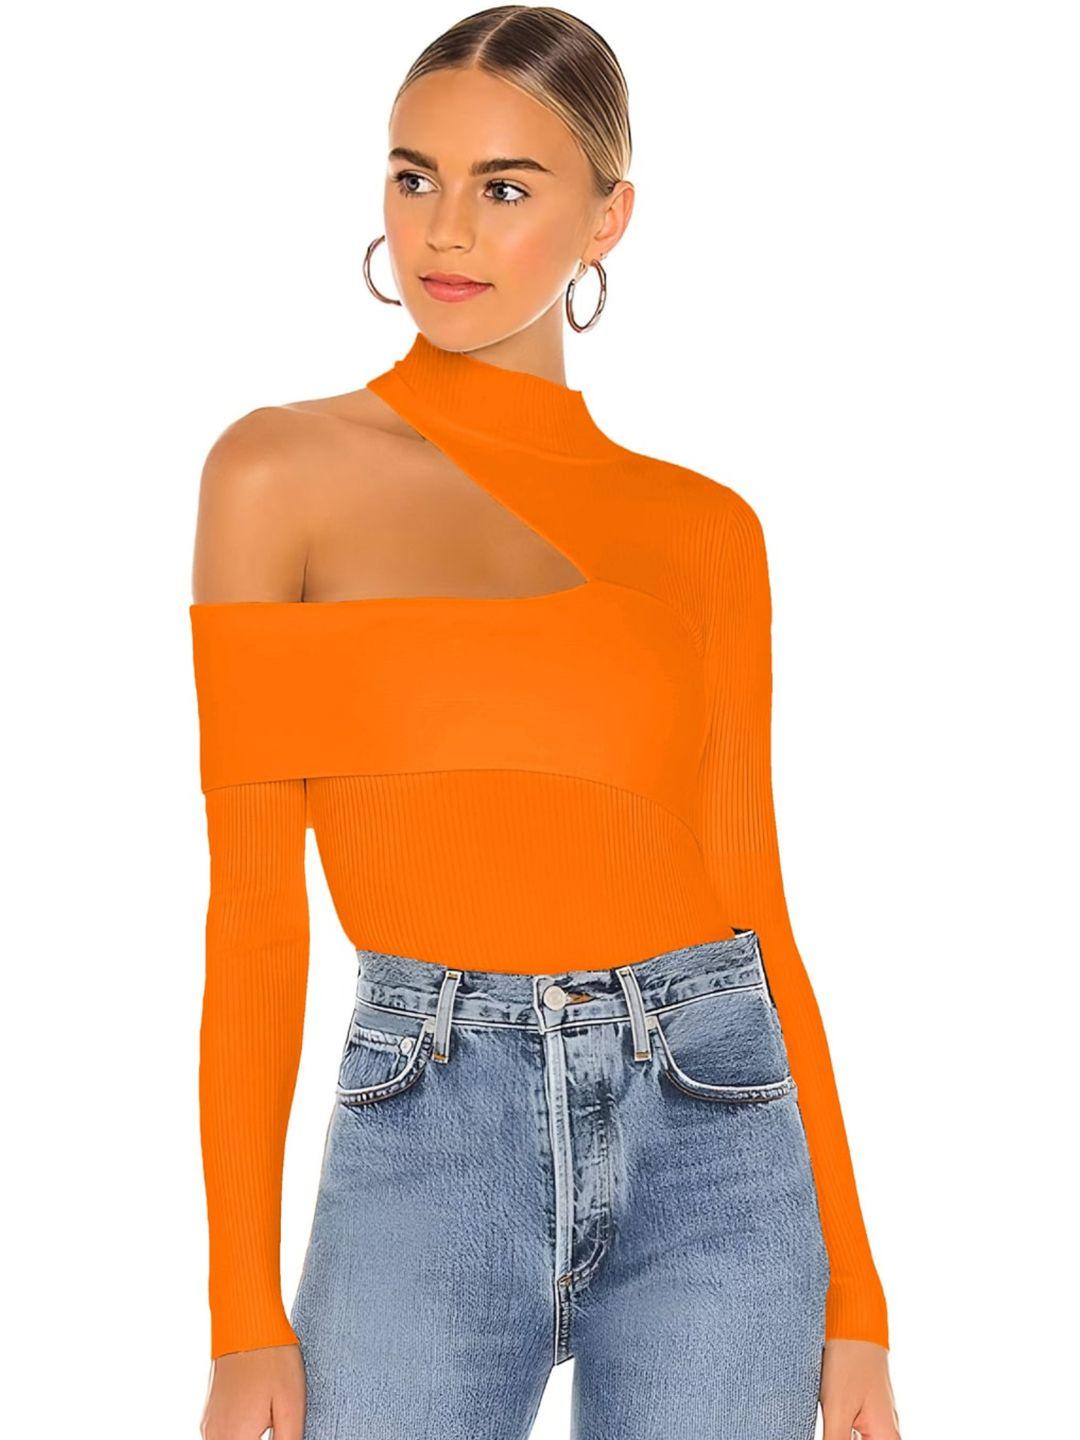 uptownie-lite-orange-high-neck-cotton-ribbed-cut-out-fitted-top